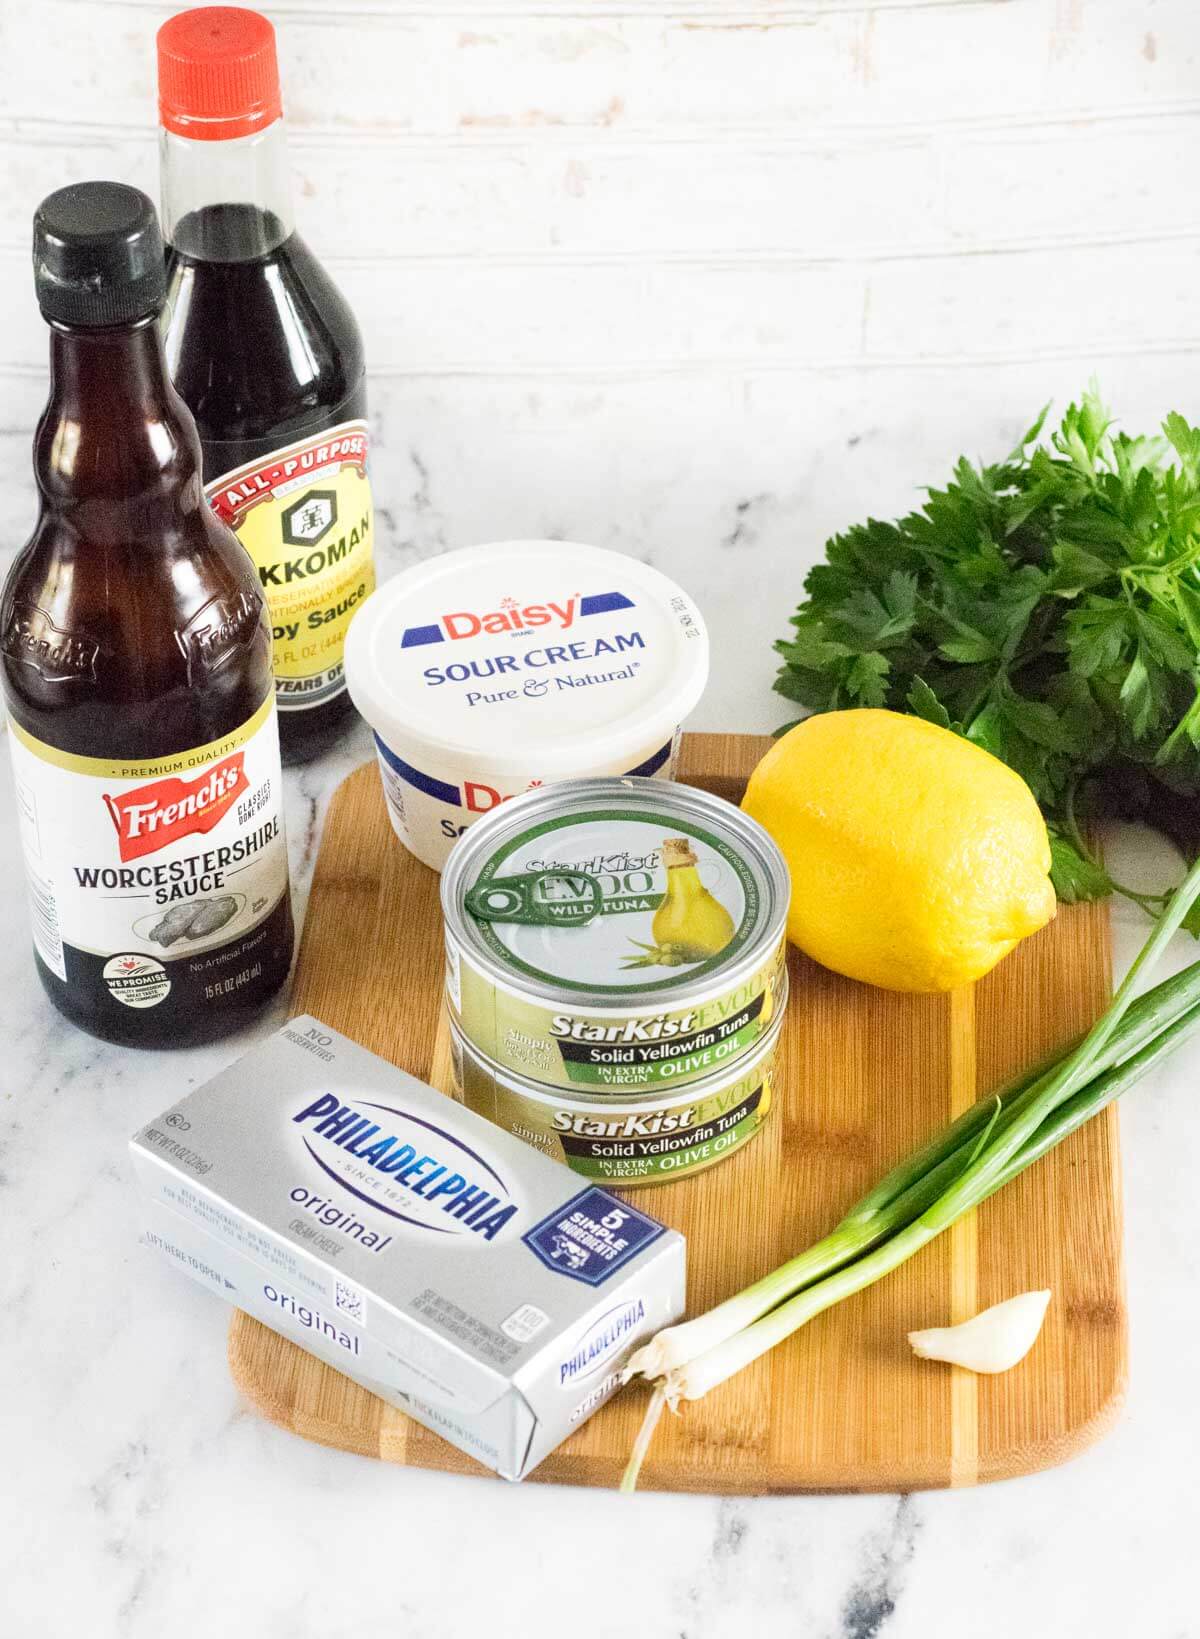 Showing ingredients needed for making tuna dip.